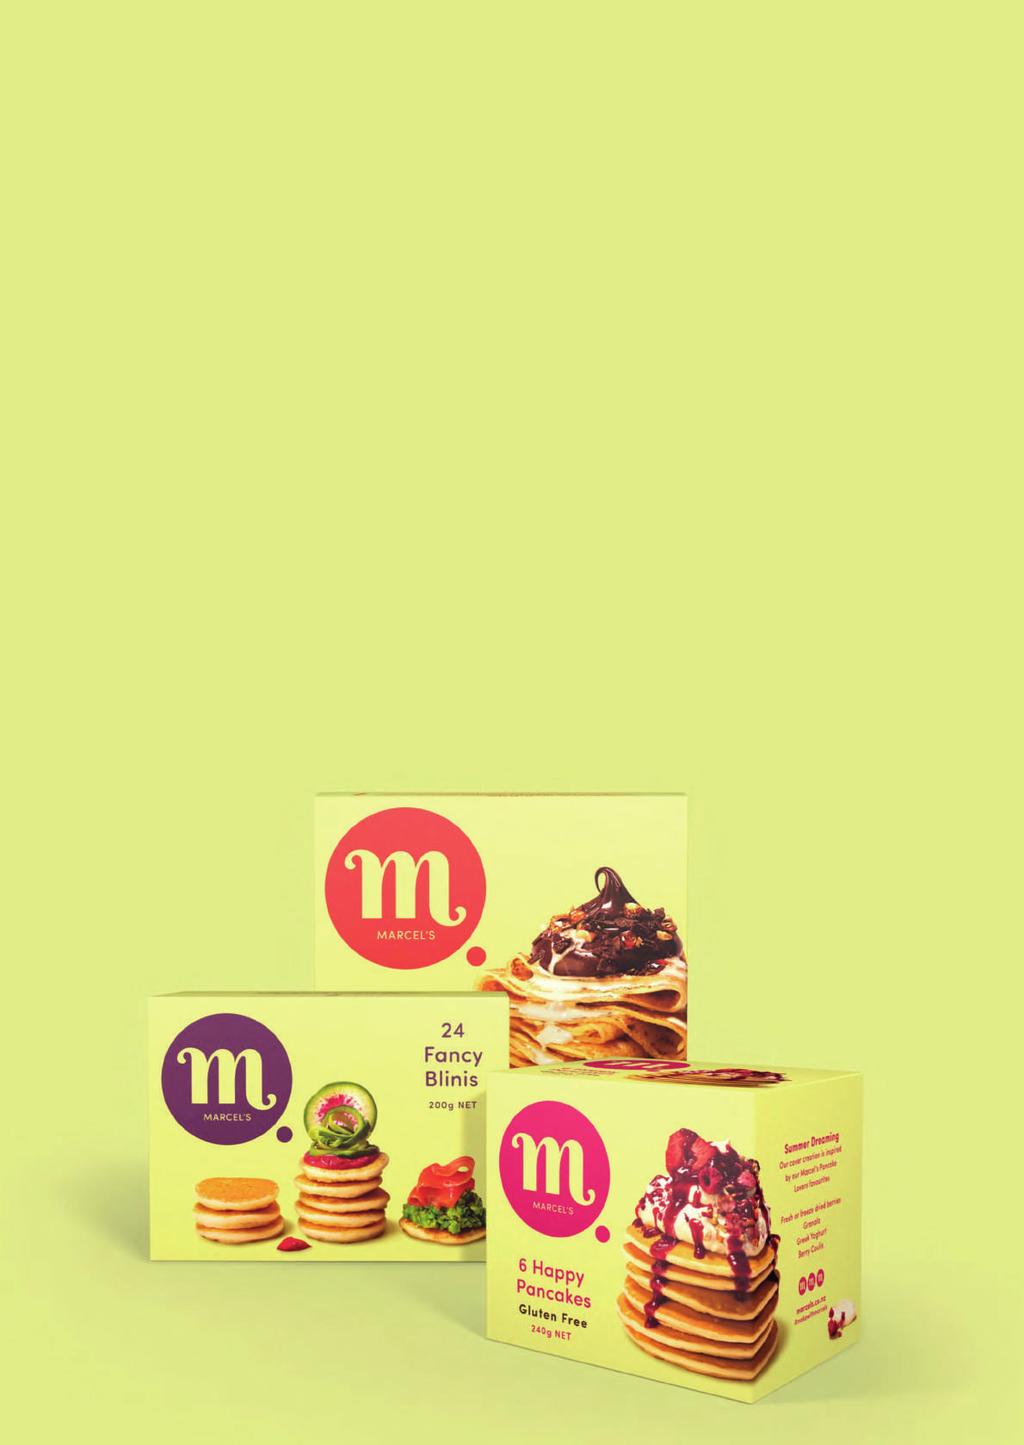 Branding The launch of Happy Pancakes is part of an overall rebranding, introducing Marcel s Modern Pancake Kitchen The modern world is complicated, full with tasks we have to fulfill.